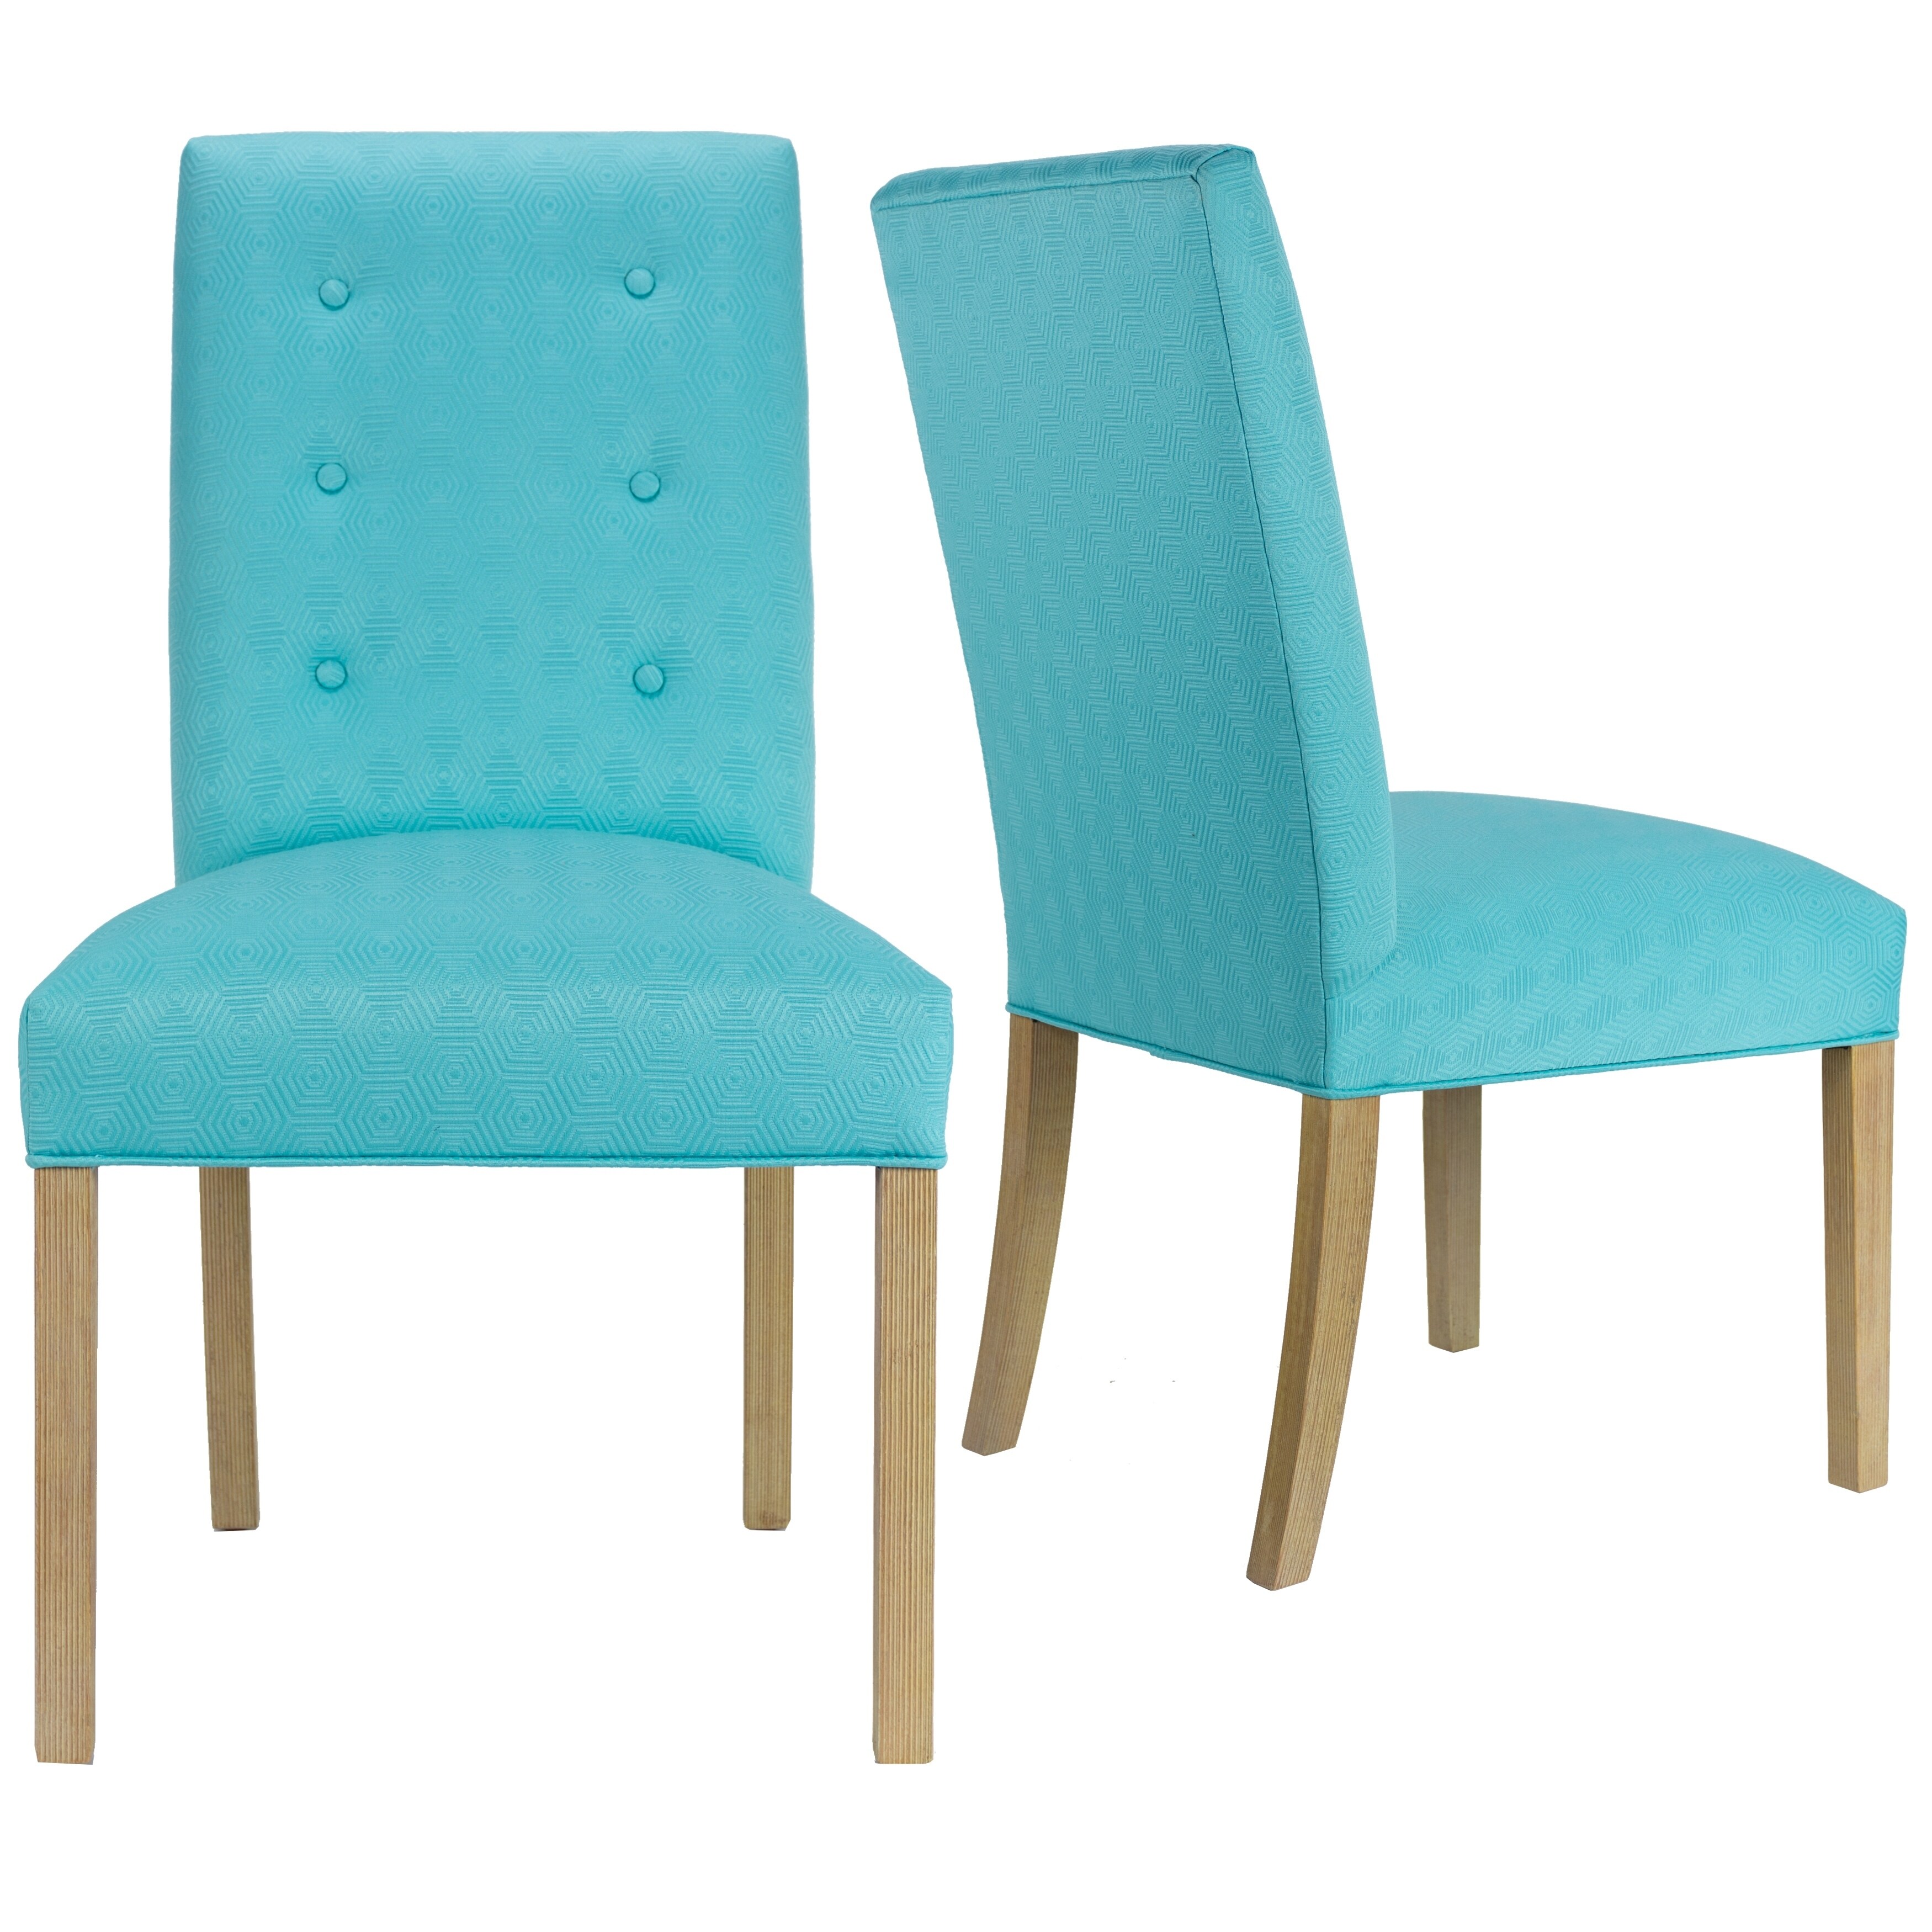 Kacey Straightback w/buttons Lace Green Upholstery Natural Legs Dining  Chairs, Set Of 2 - Bed Bath & Beyond - 20602253